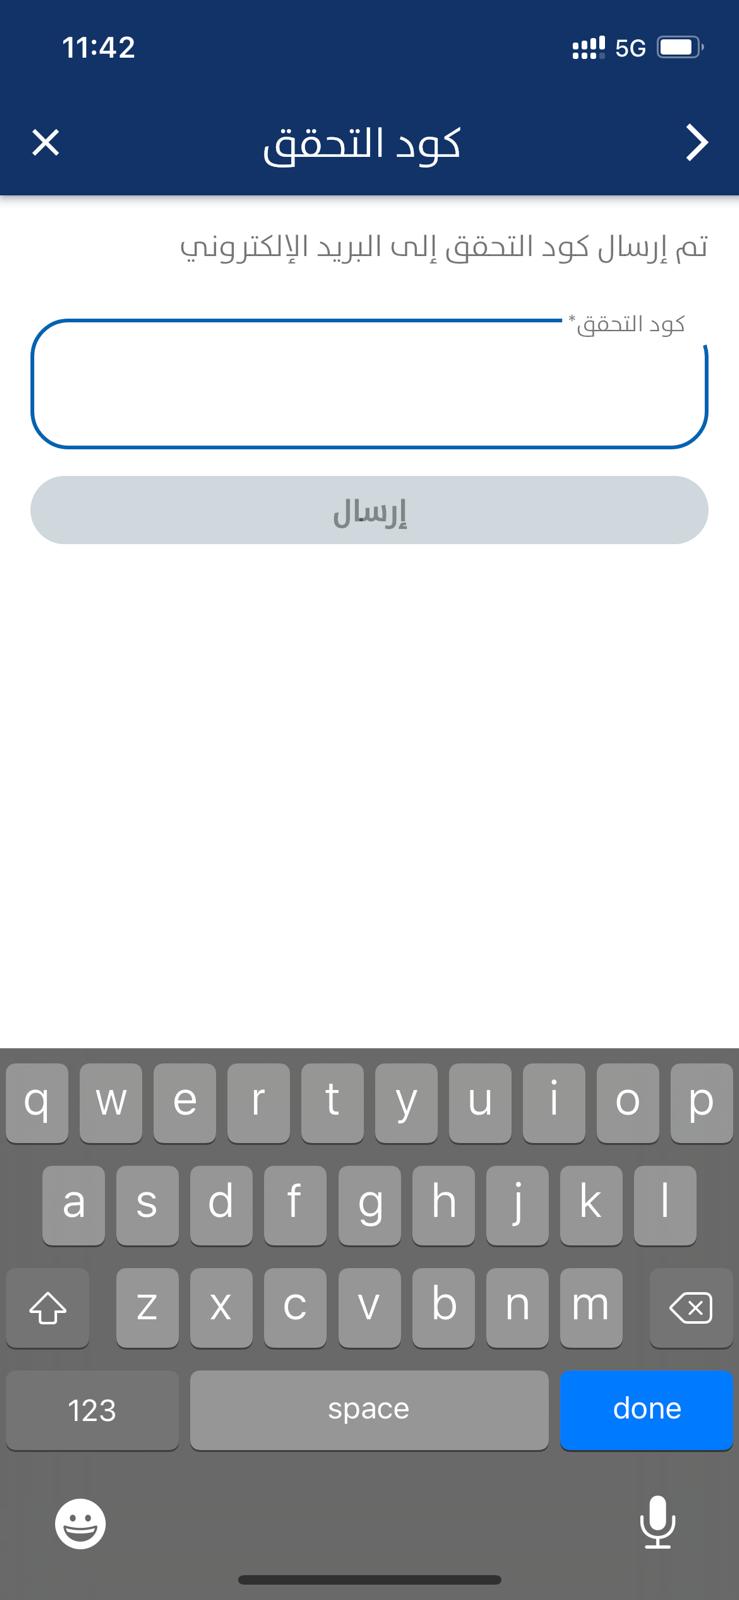 Updating Email id in PACI from Kuwait Sahel App Step 2